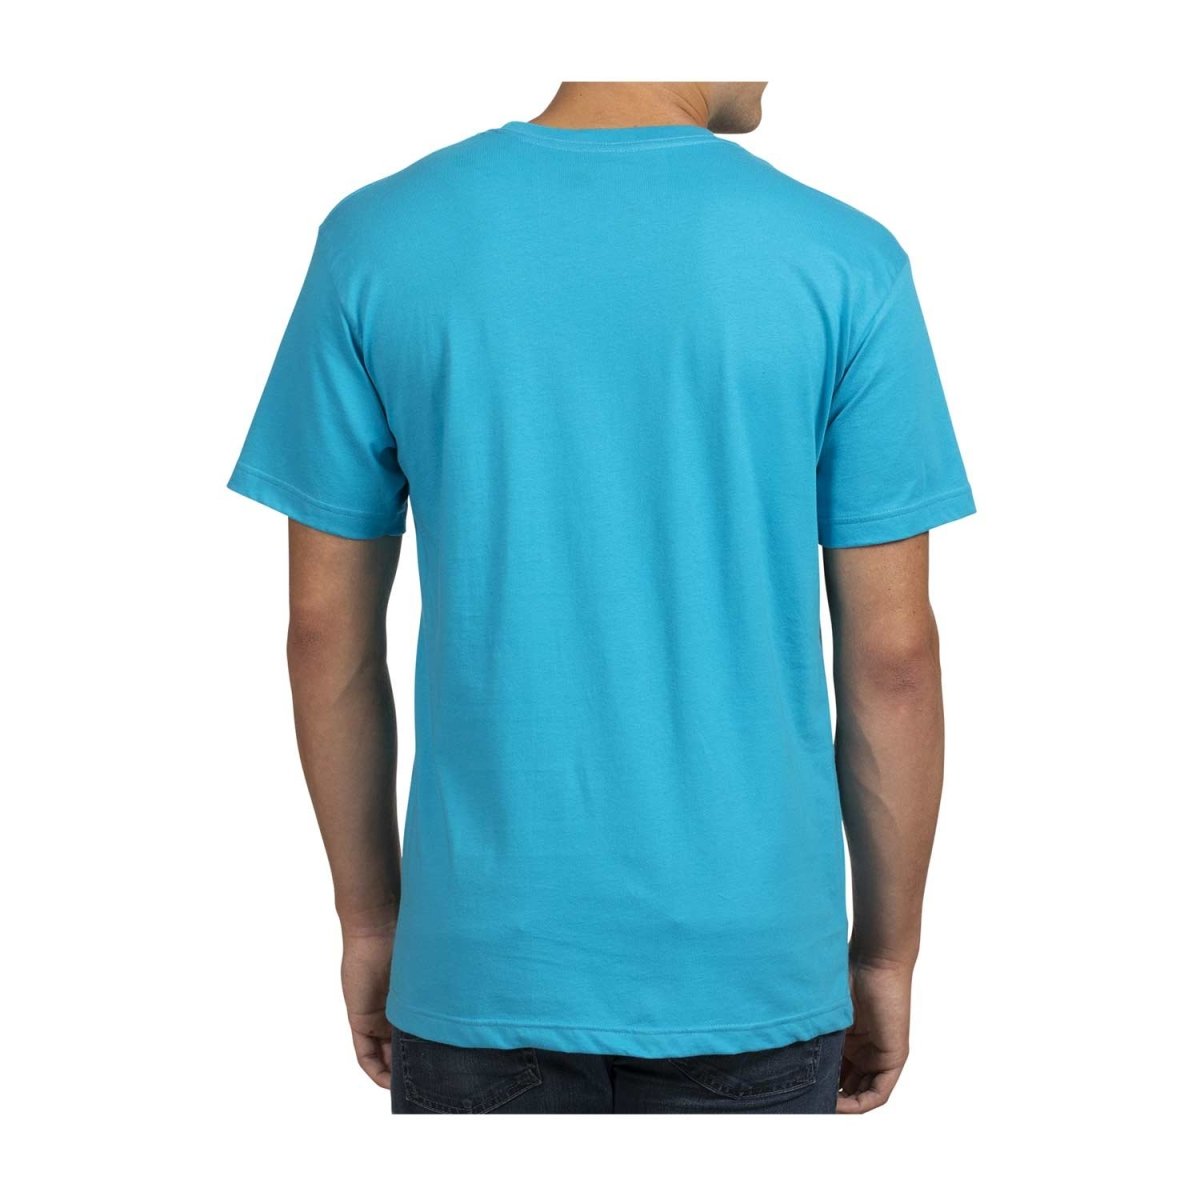 Pikachu & Mantyke Turquoise Relaxed Fit Crew Neck T-Shirt - Adult ...